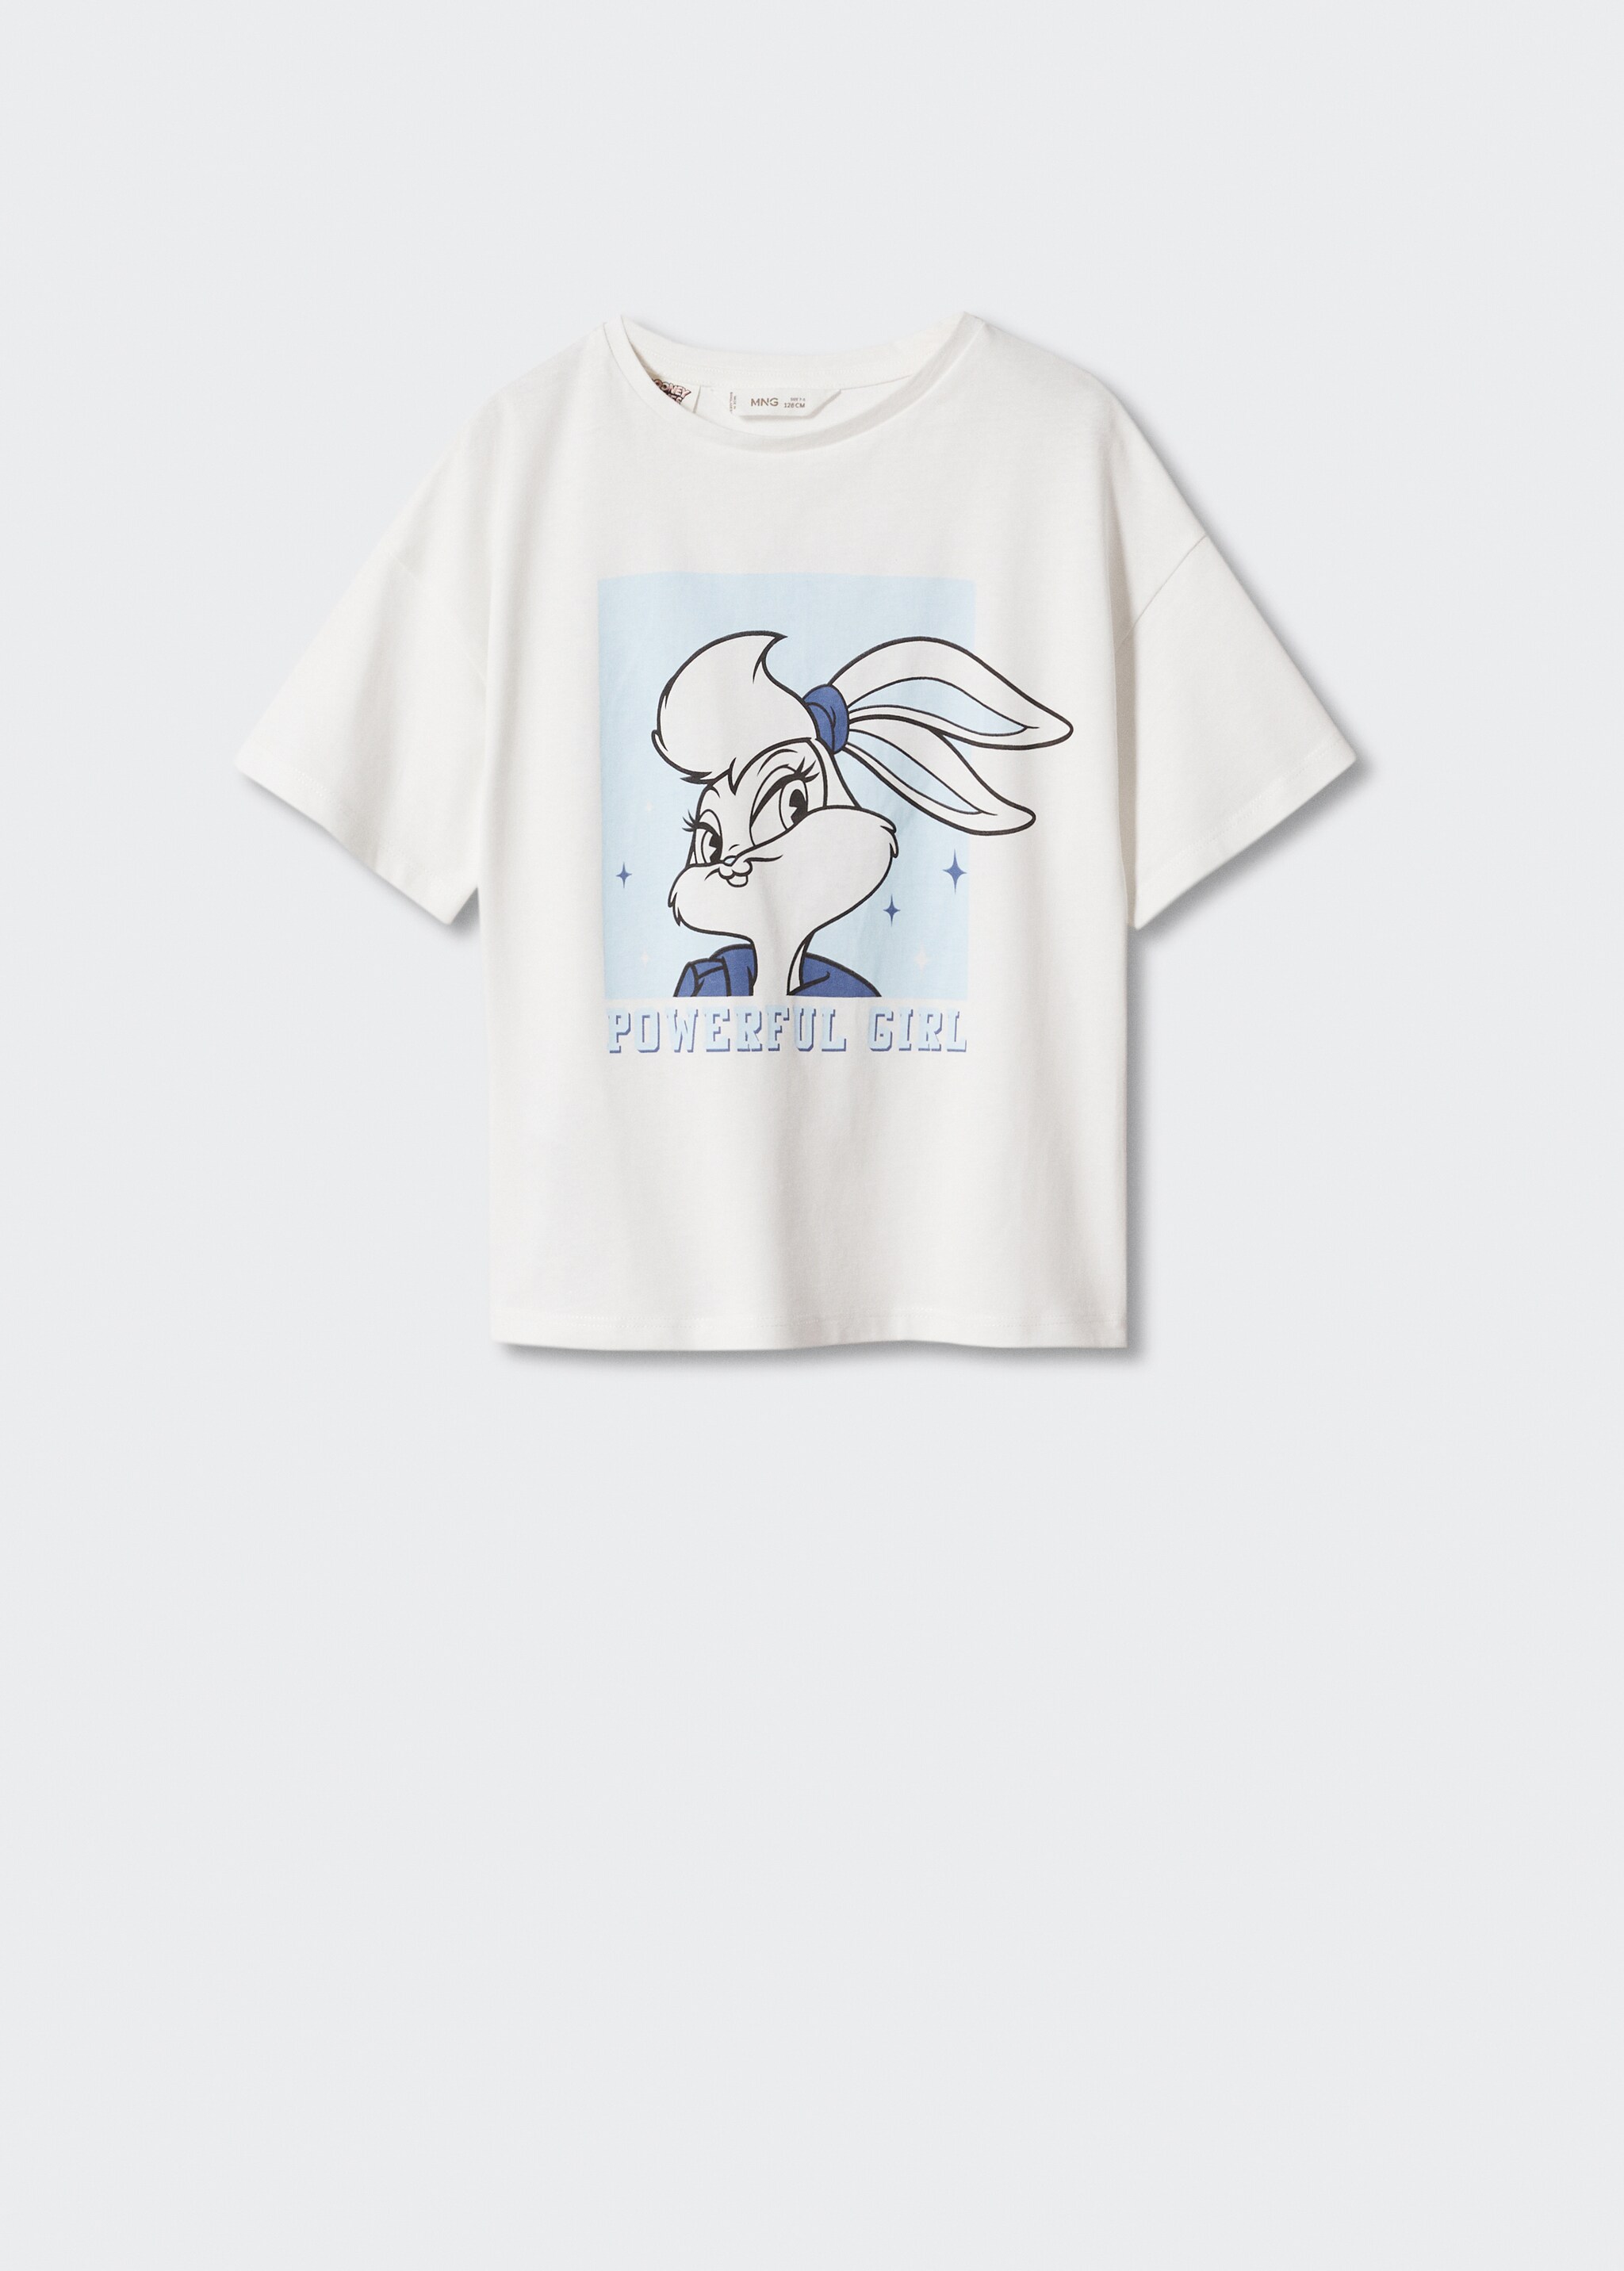 Lola Bunny t-shirt - Article without model